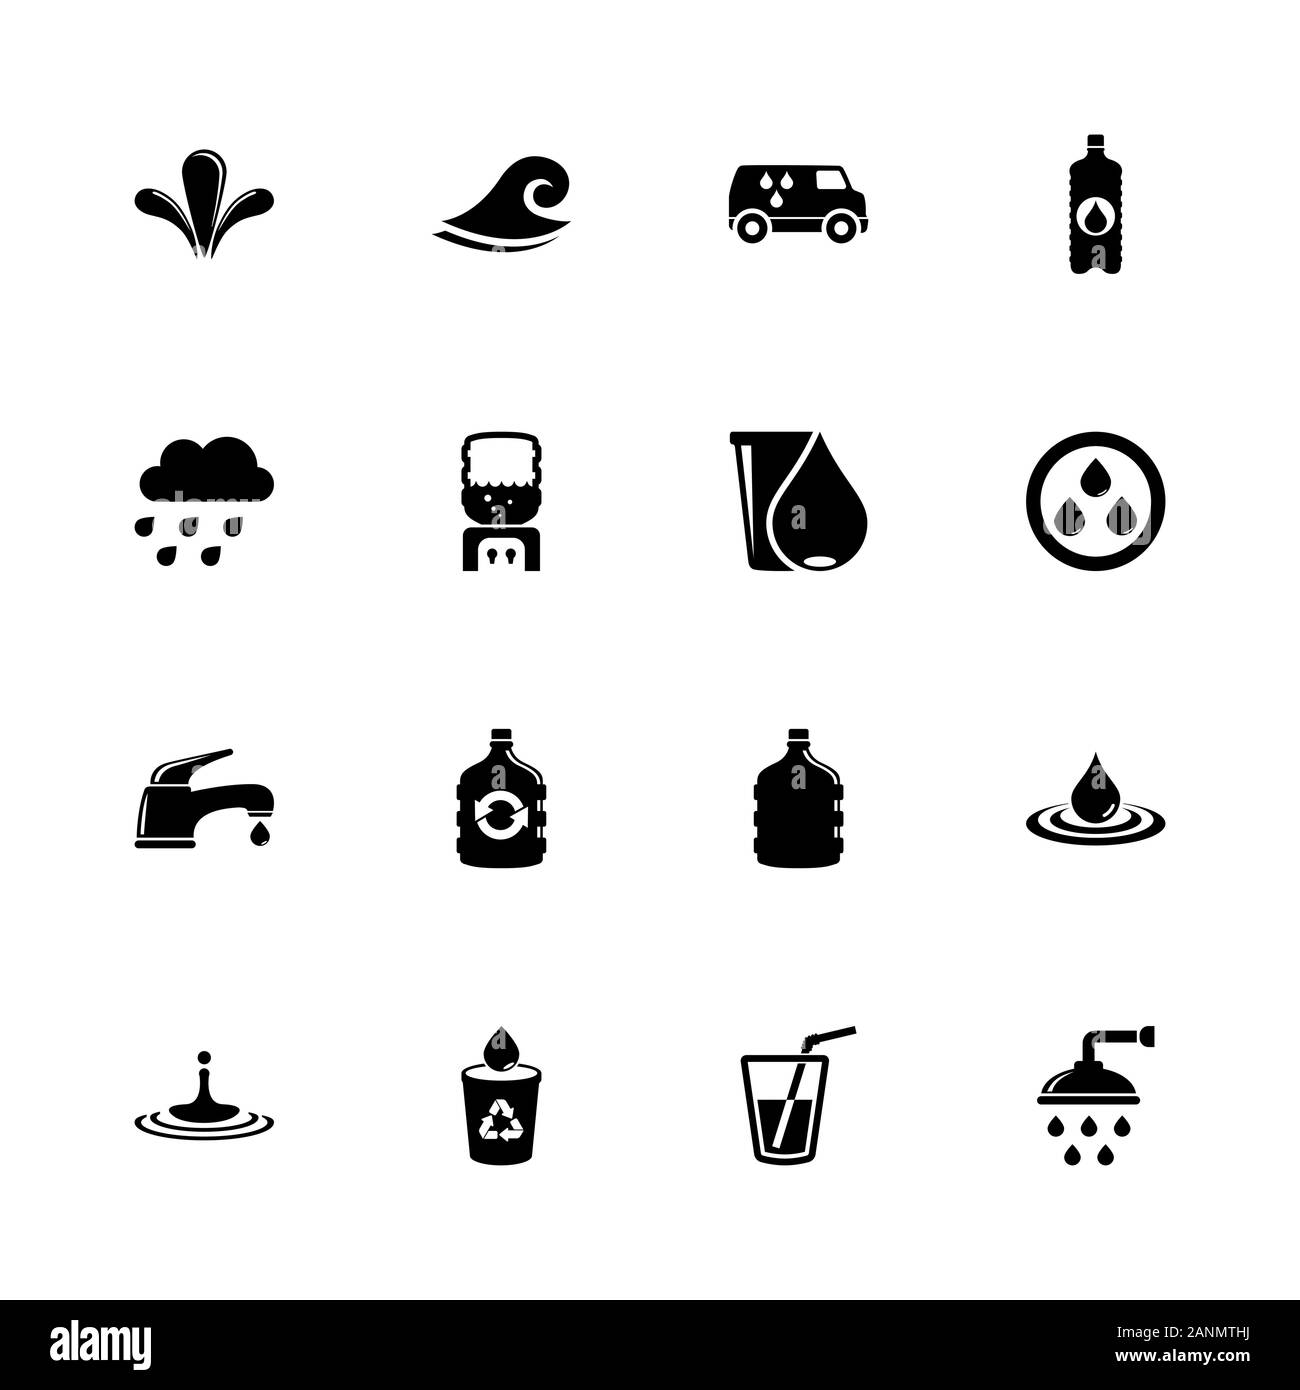 Water icons - Expand to any size - Change to any colour. Flat Vector Icons - Black Illustration on White Background. Stock Vector